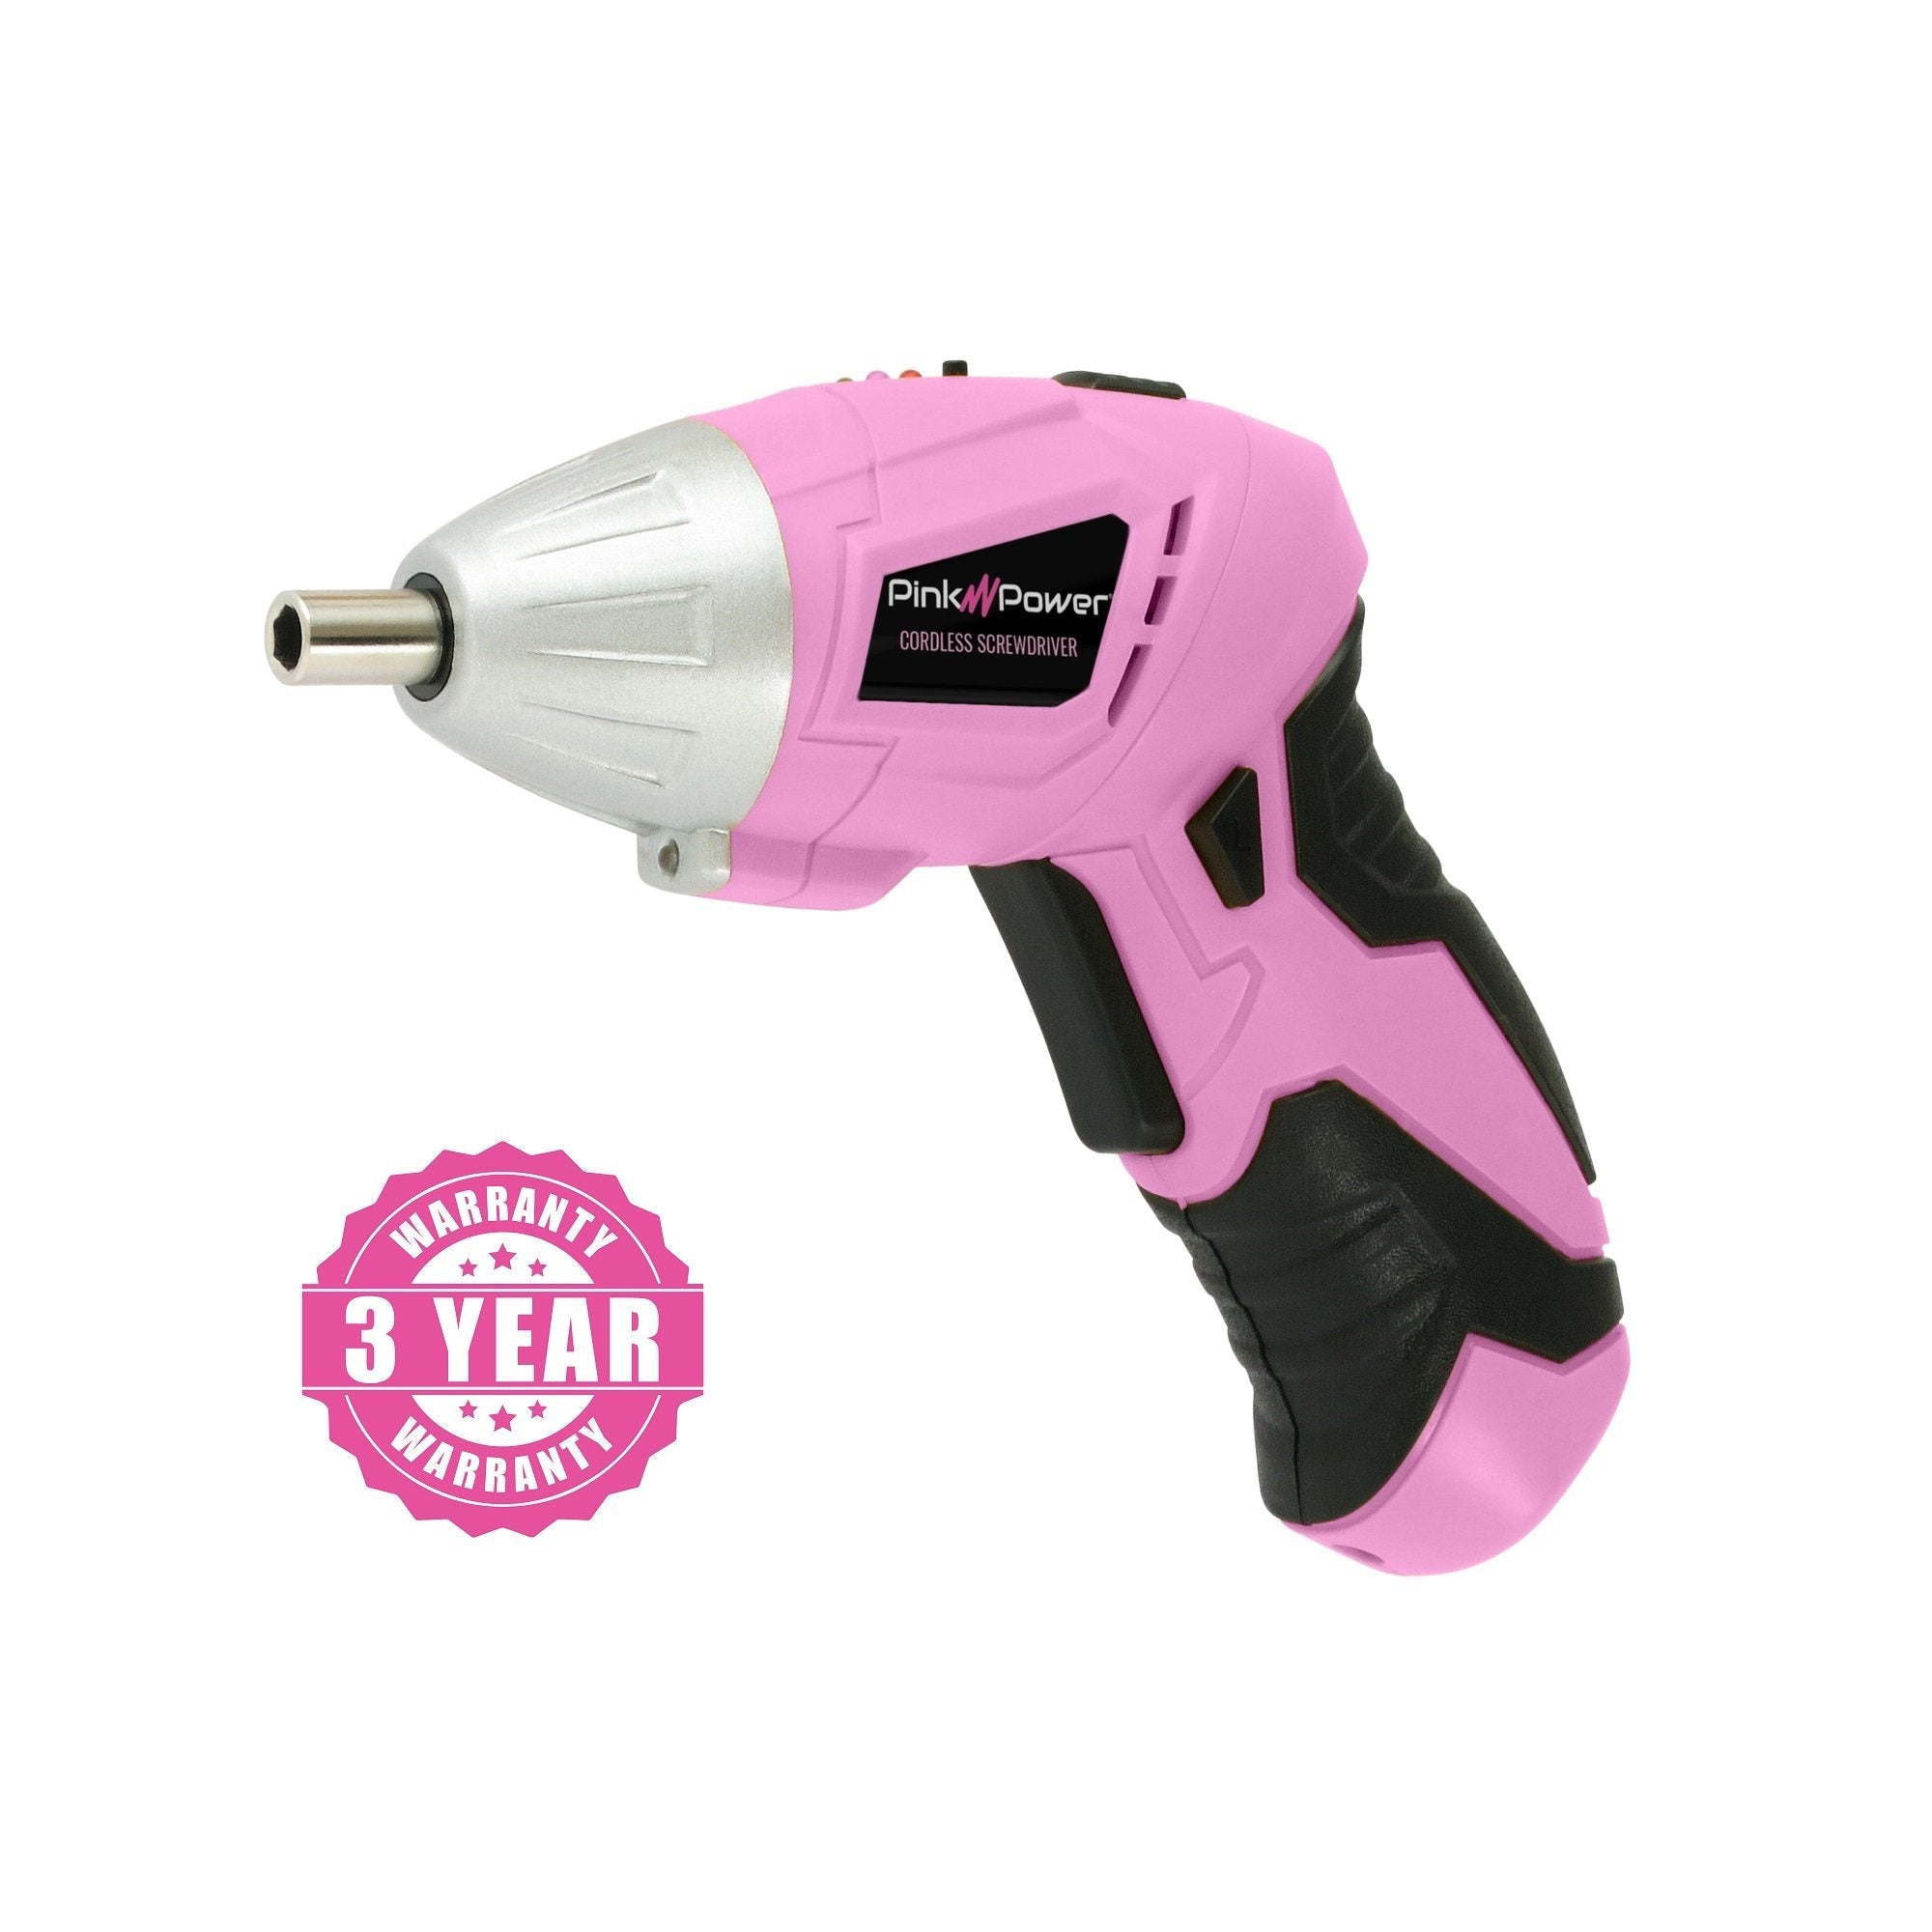 6-Piece Magnetic and Electric Screwdriver Bundle | Pink Power